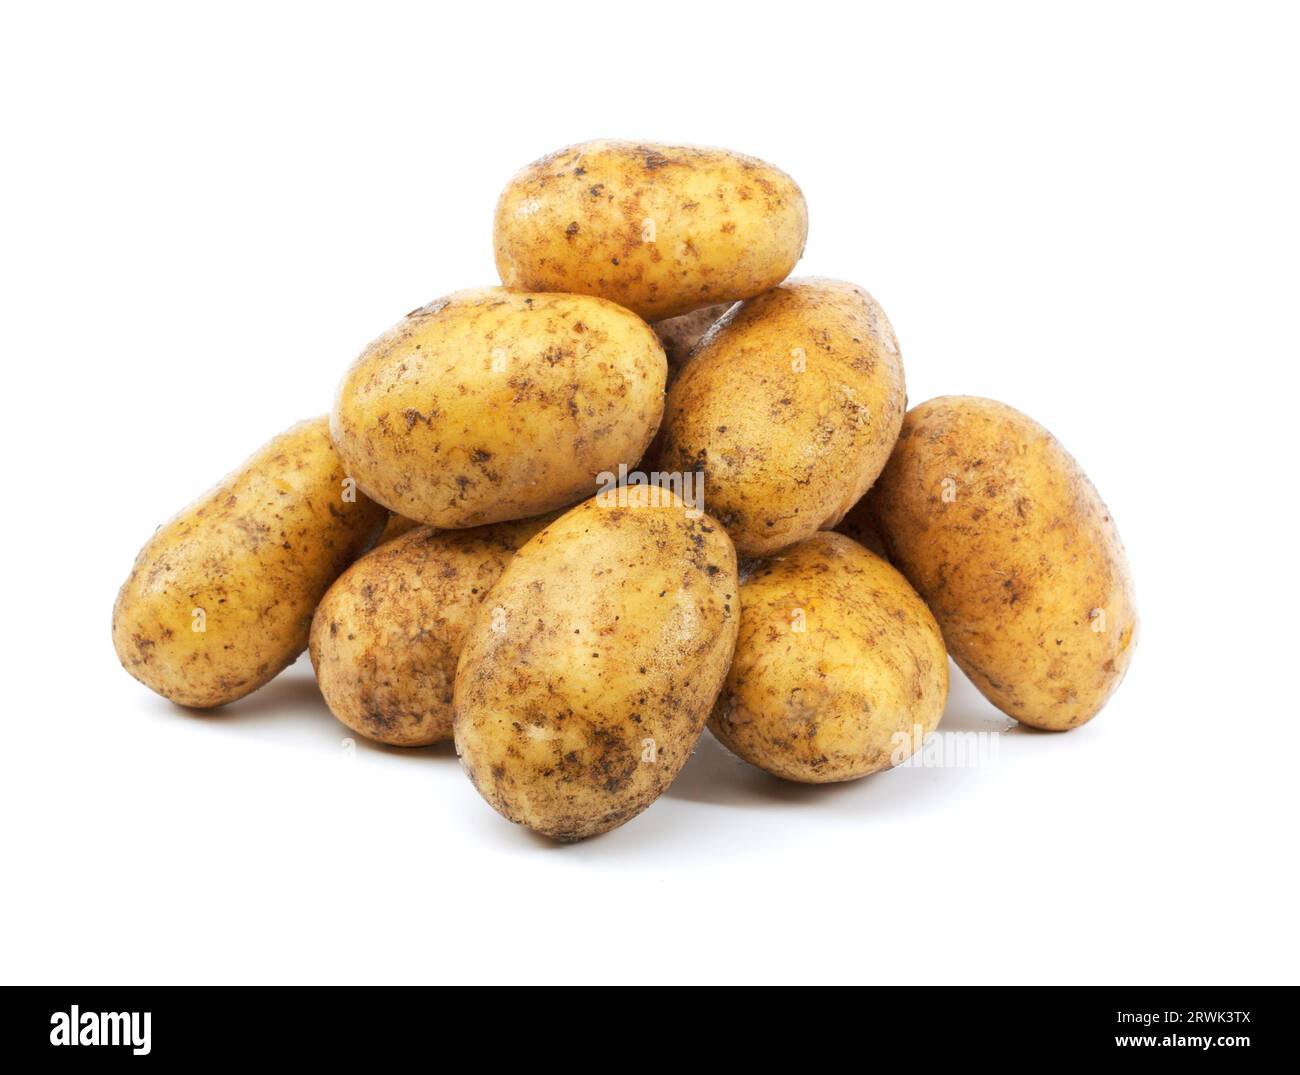 A Heap of harvested dirty potatoes on white Stock Photo